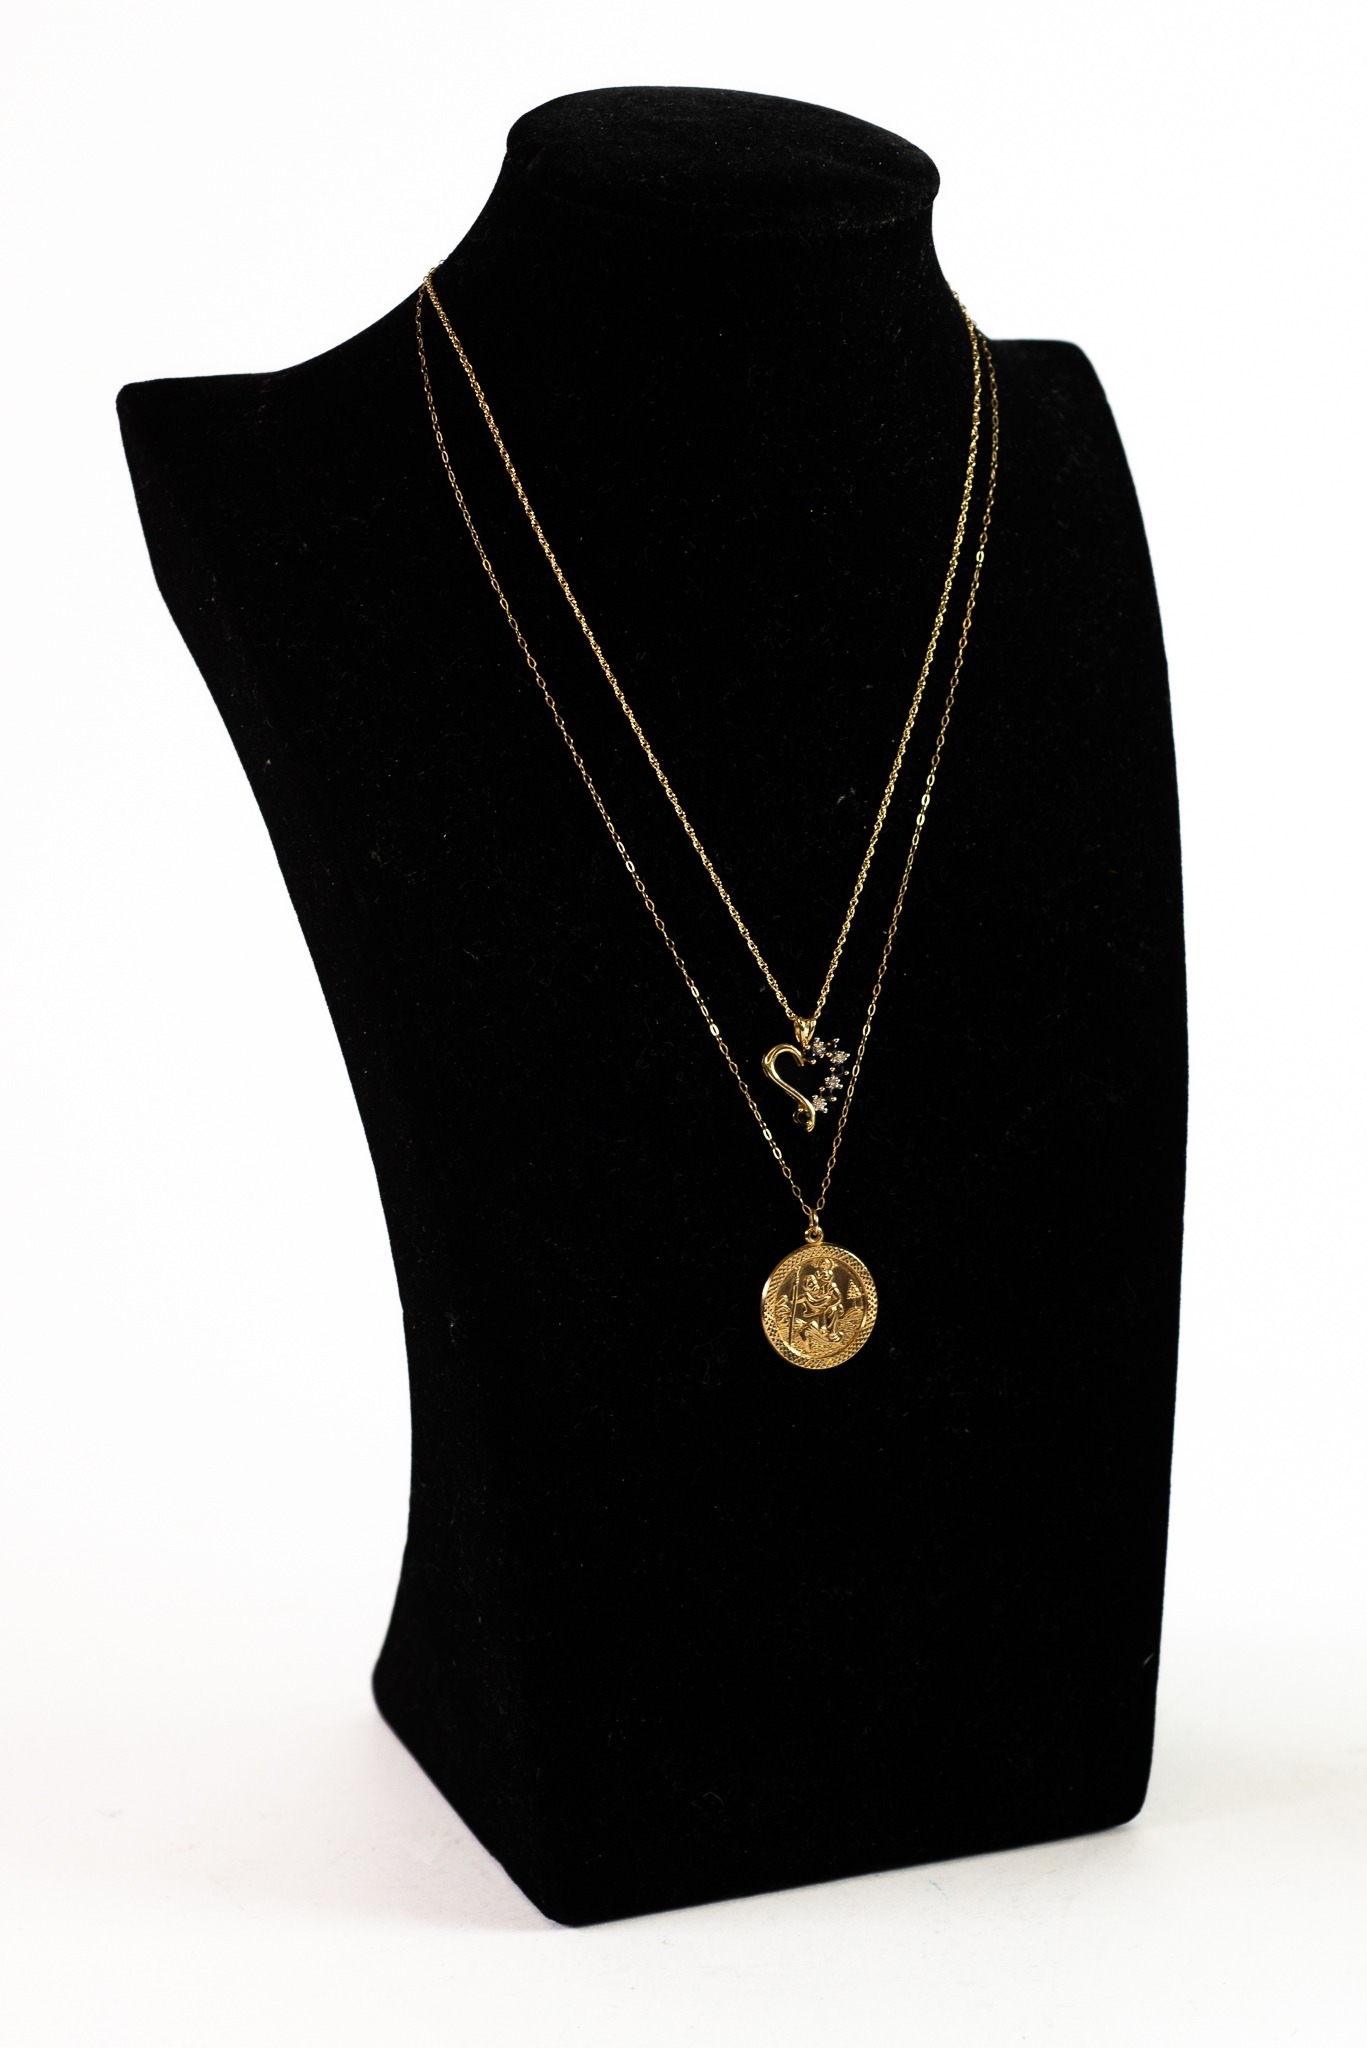 9ct GOLD FINE CHAIN NECKLACE with 9ct GOLD St Christopher DISC PENDANT and a 9ct GOLD FINE CHAIN